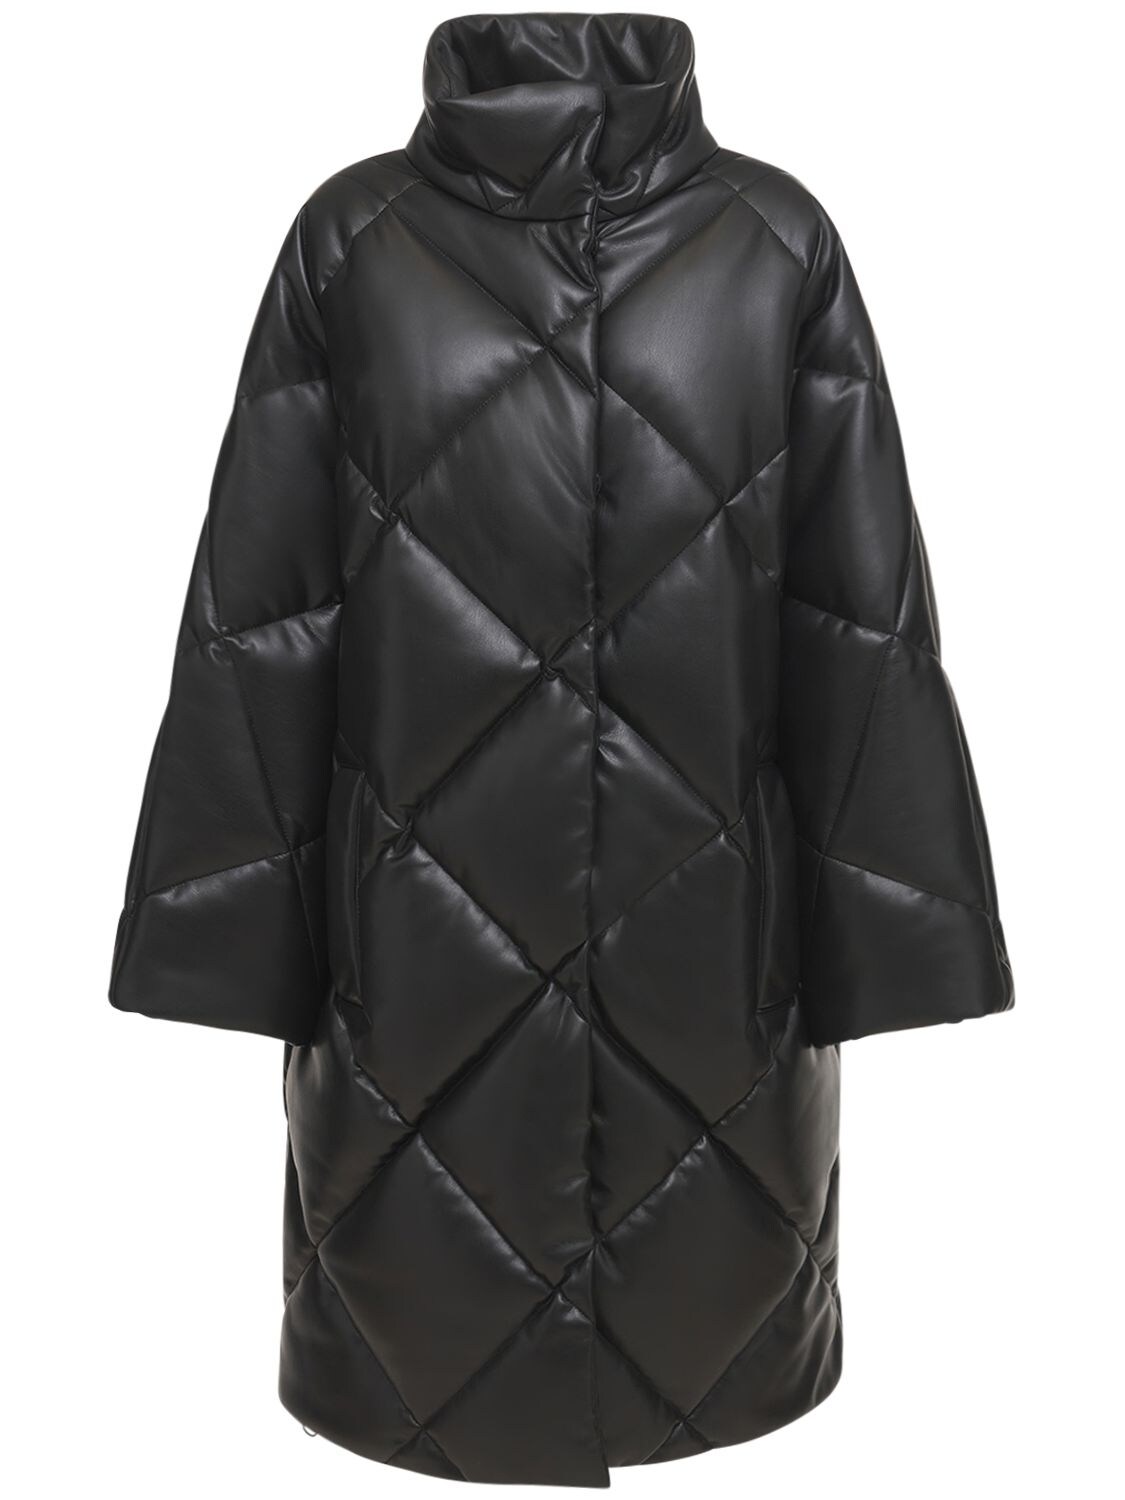 STAND STUDIO Anissa Faux Leather Puffer Coat